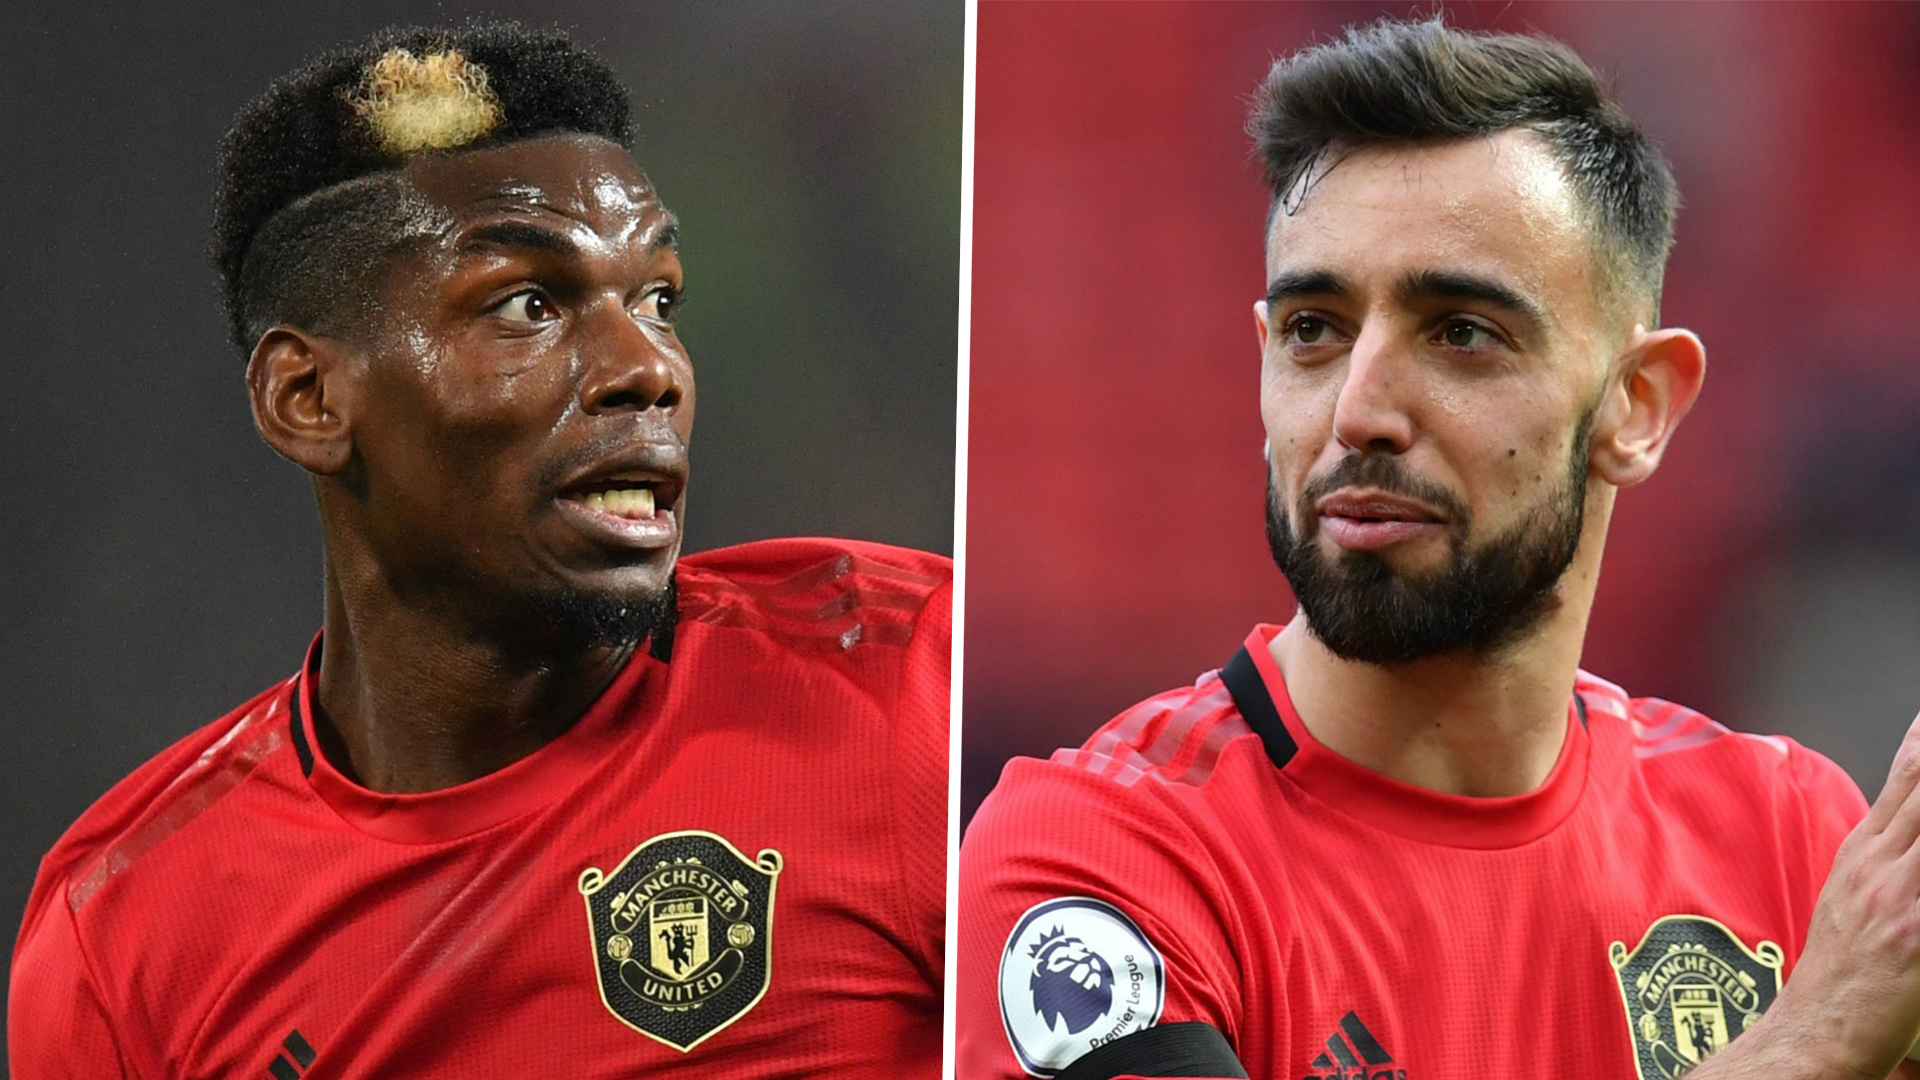 'To play alongside Pogba will be amazing' - Fernandes excited to link up with World Cup winner at Man Utd